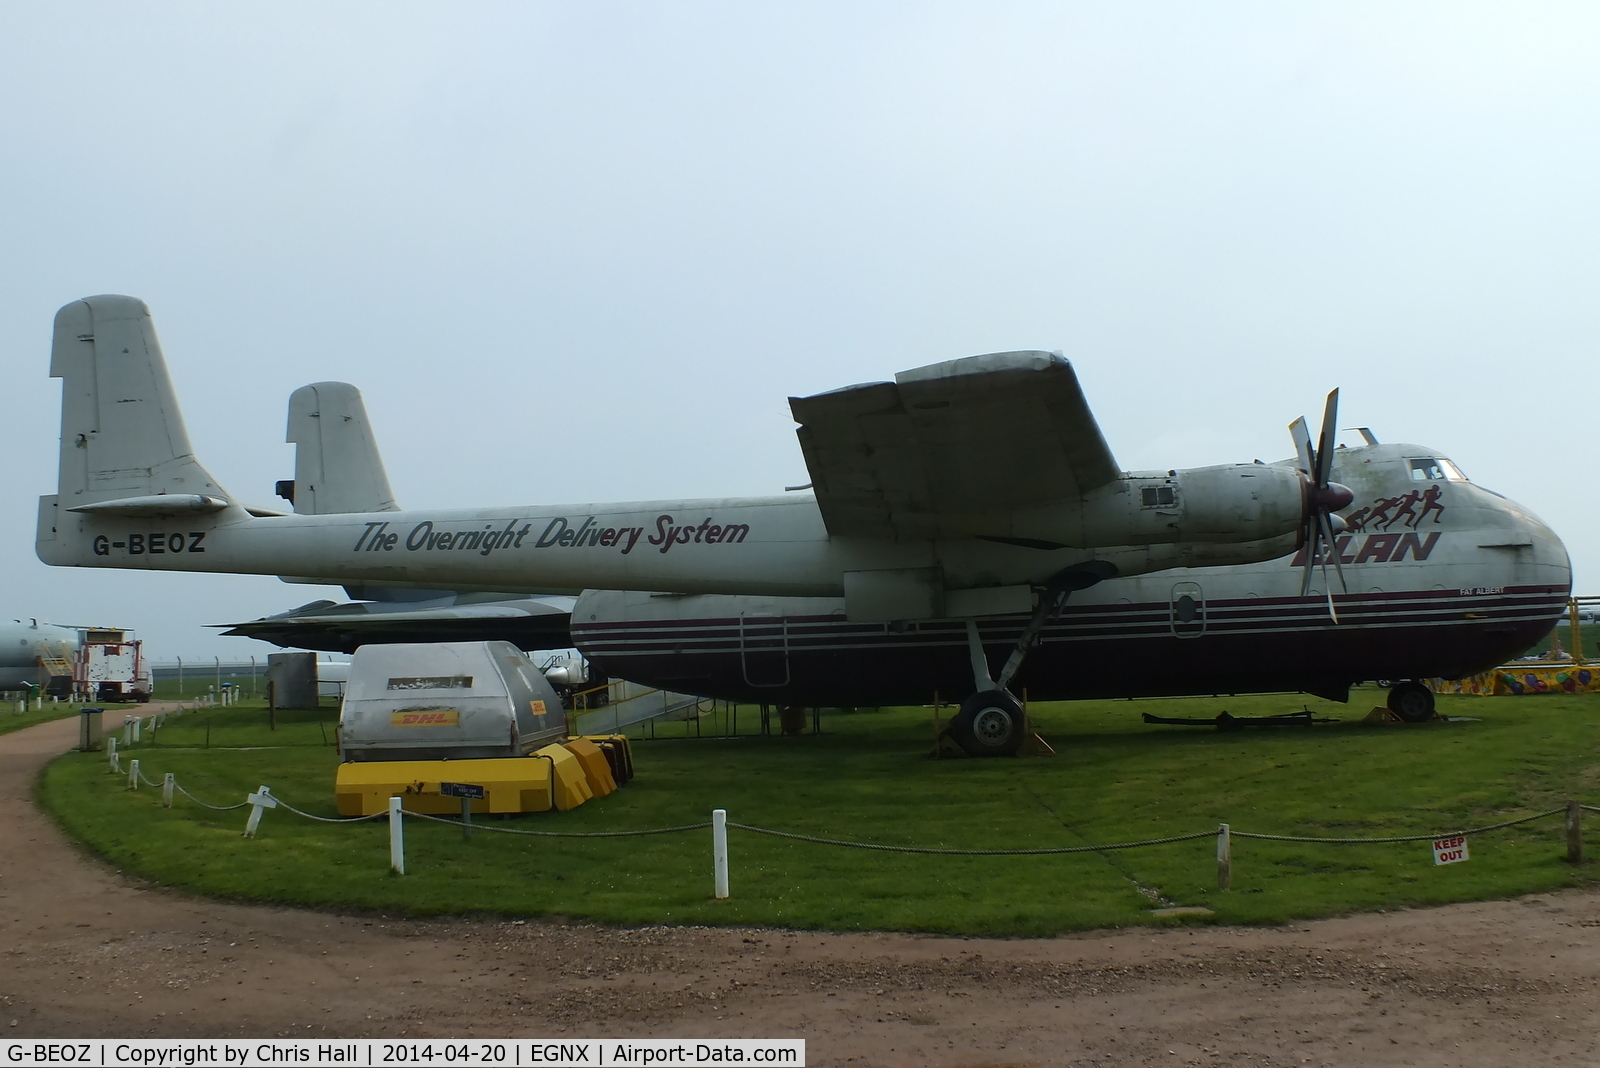 G-BEOZ, 1960 Armstrong Whitworth AW650 Argosy 101 C/N 6660, Preserved at the East Midlands Aeropark